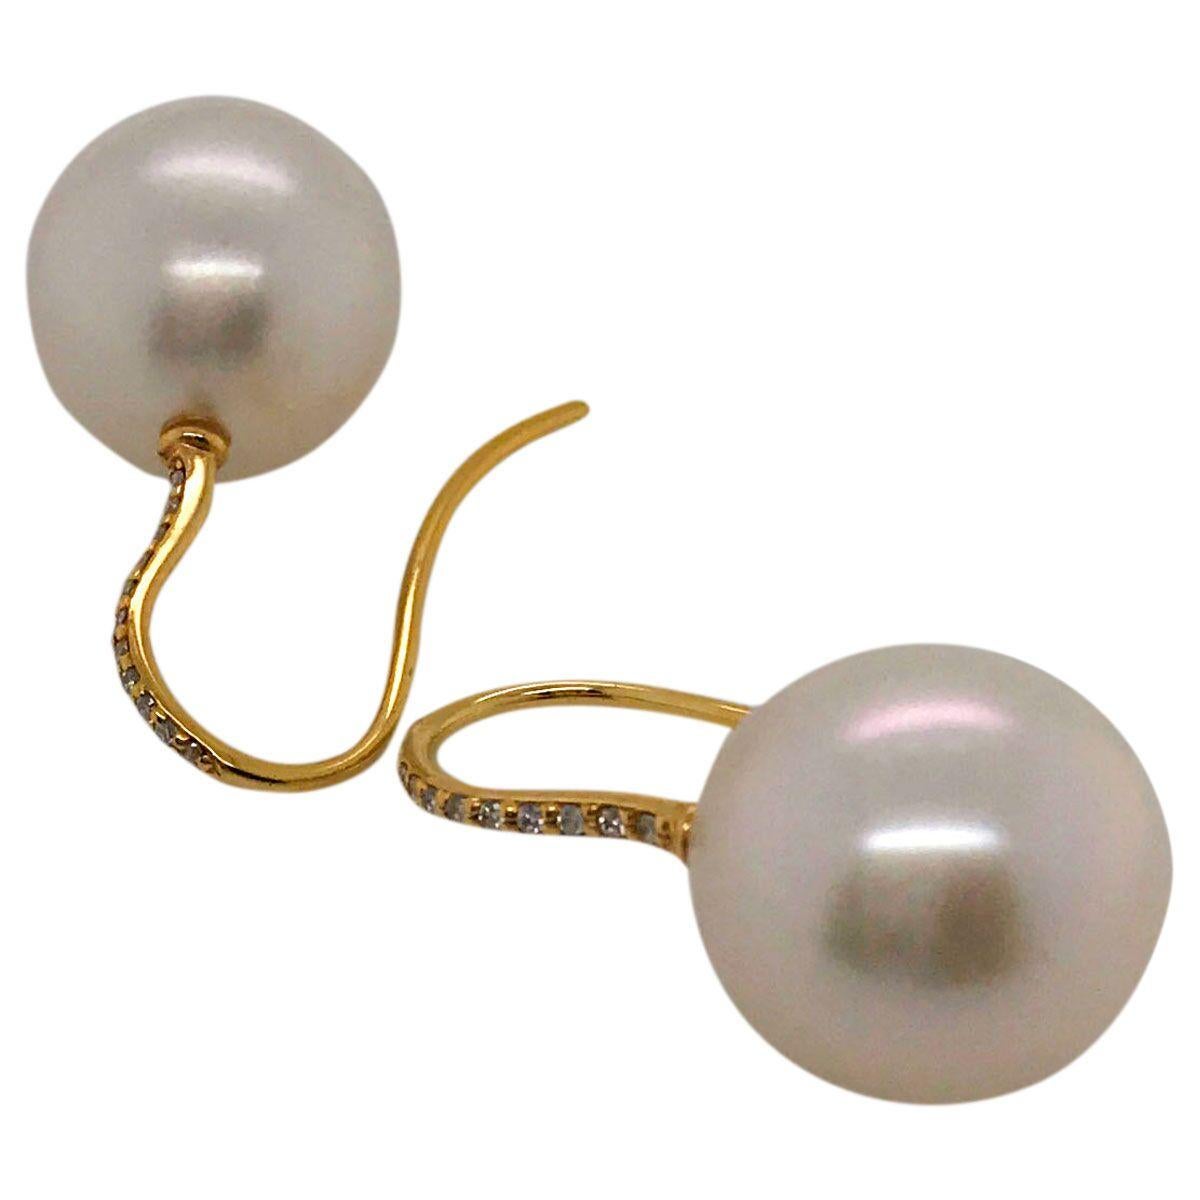 Classic and perfect for every occasion, you just have to have one pair of pearl earrings in your jewellery wardrobe - maybe one isn't even enough! These earrings are beautifully made, delicate and elegant. As the main feature they have 13mm creamy